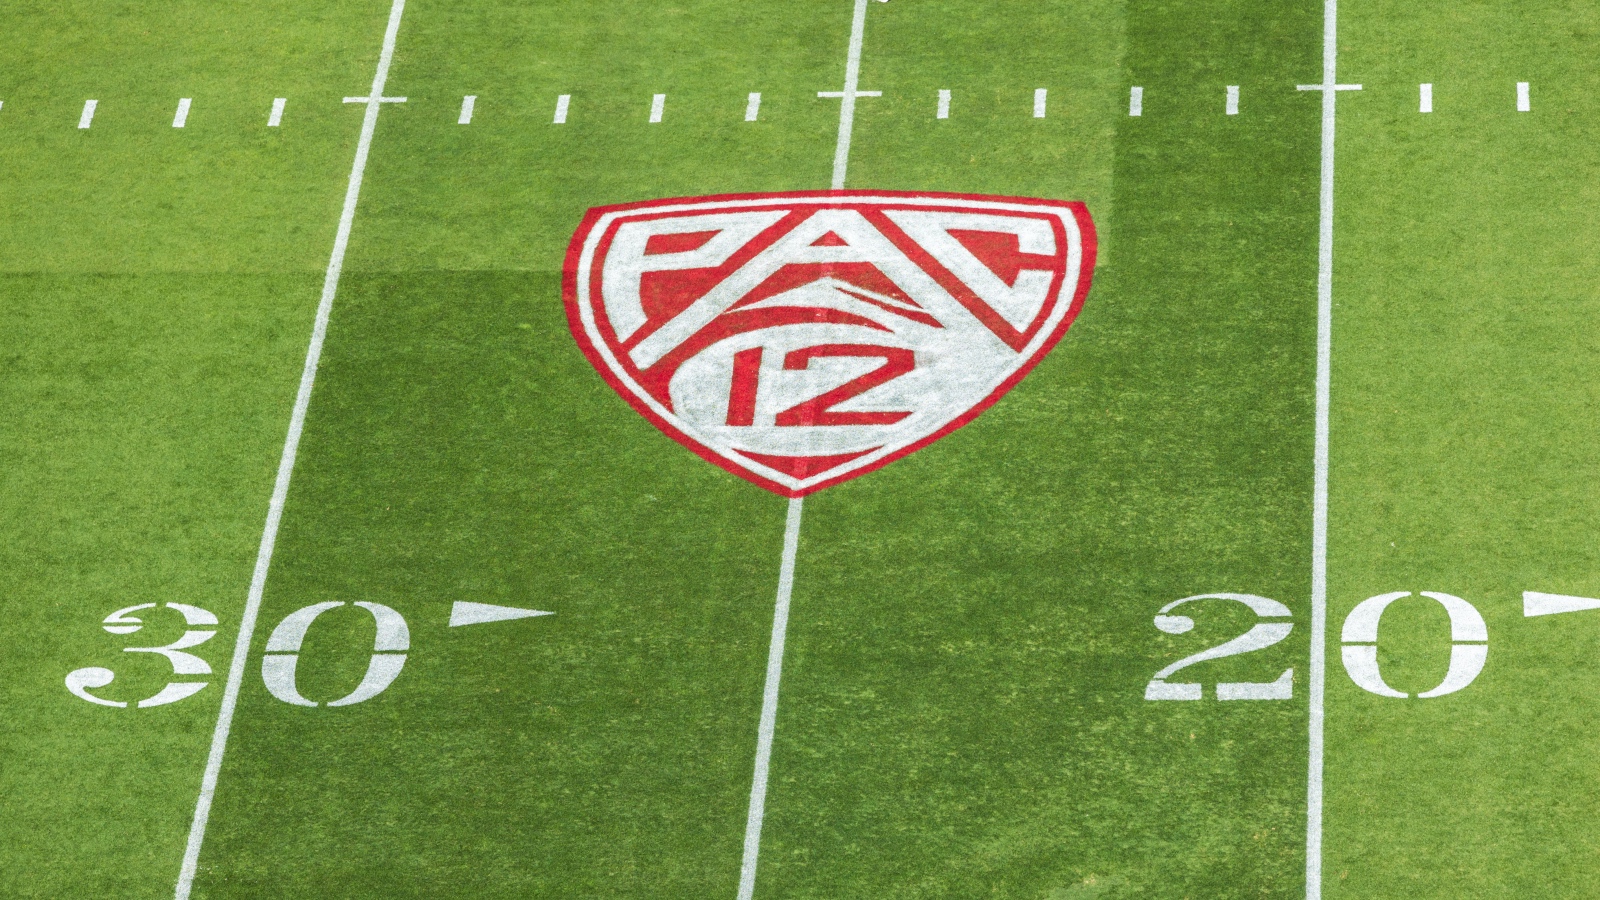 Pac-12 conference logo on the field